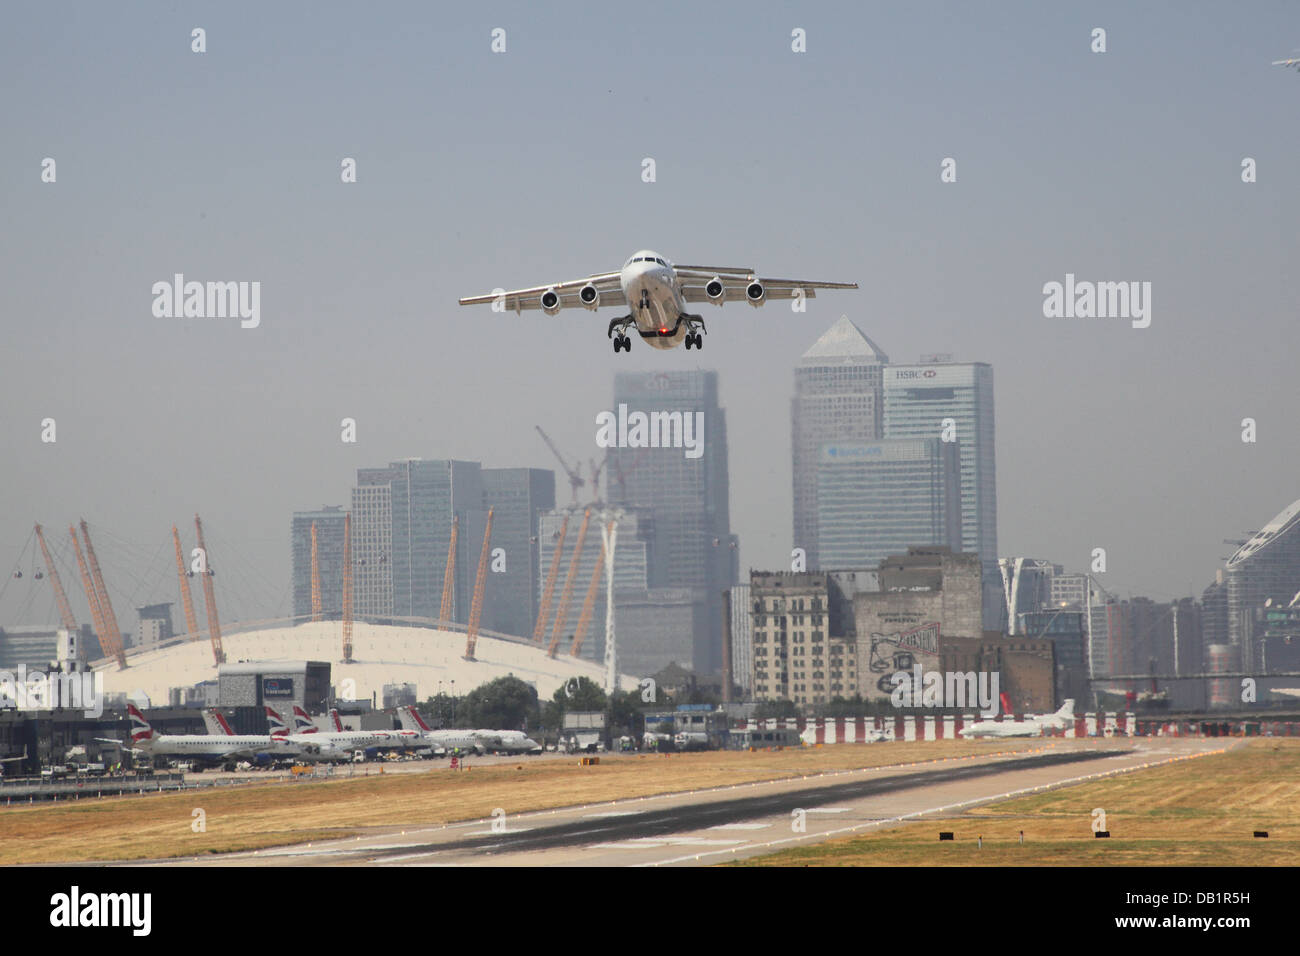 A British Aerospace 146 jet takes off at London City Airport with Canary Wharf and the Millennium Dome in background Stock Photo